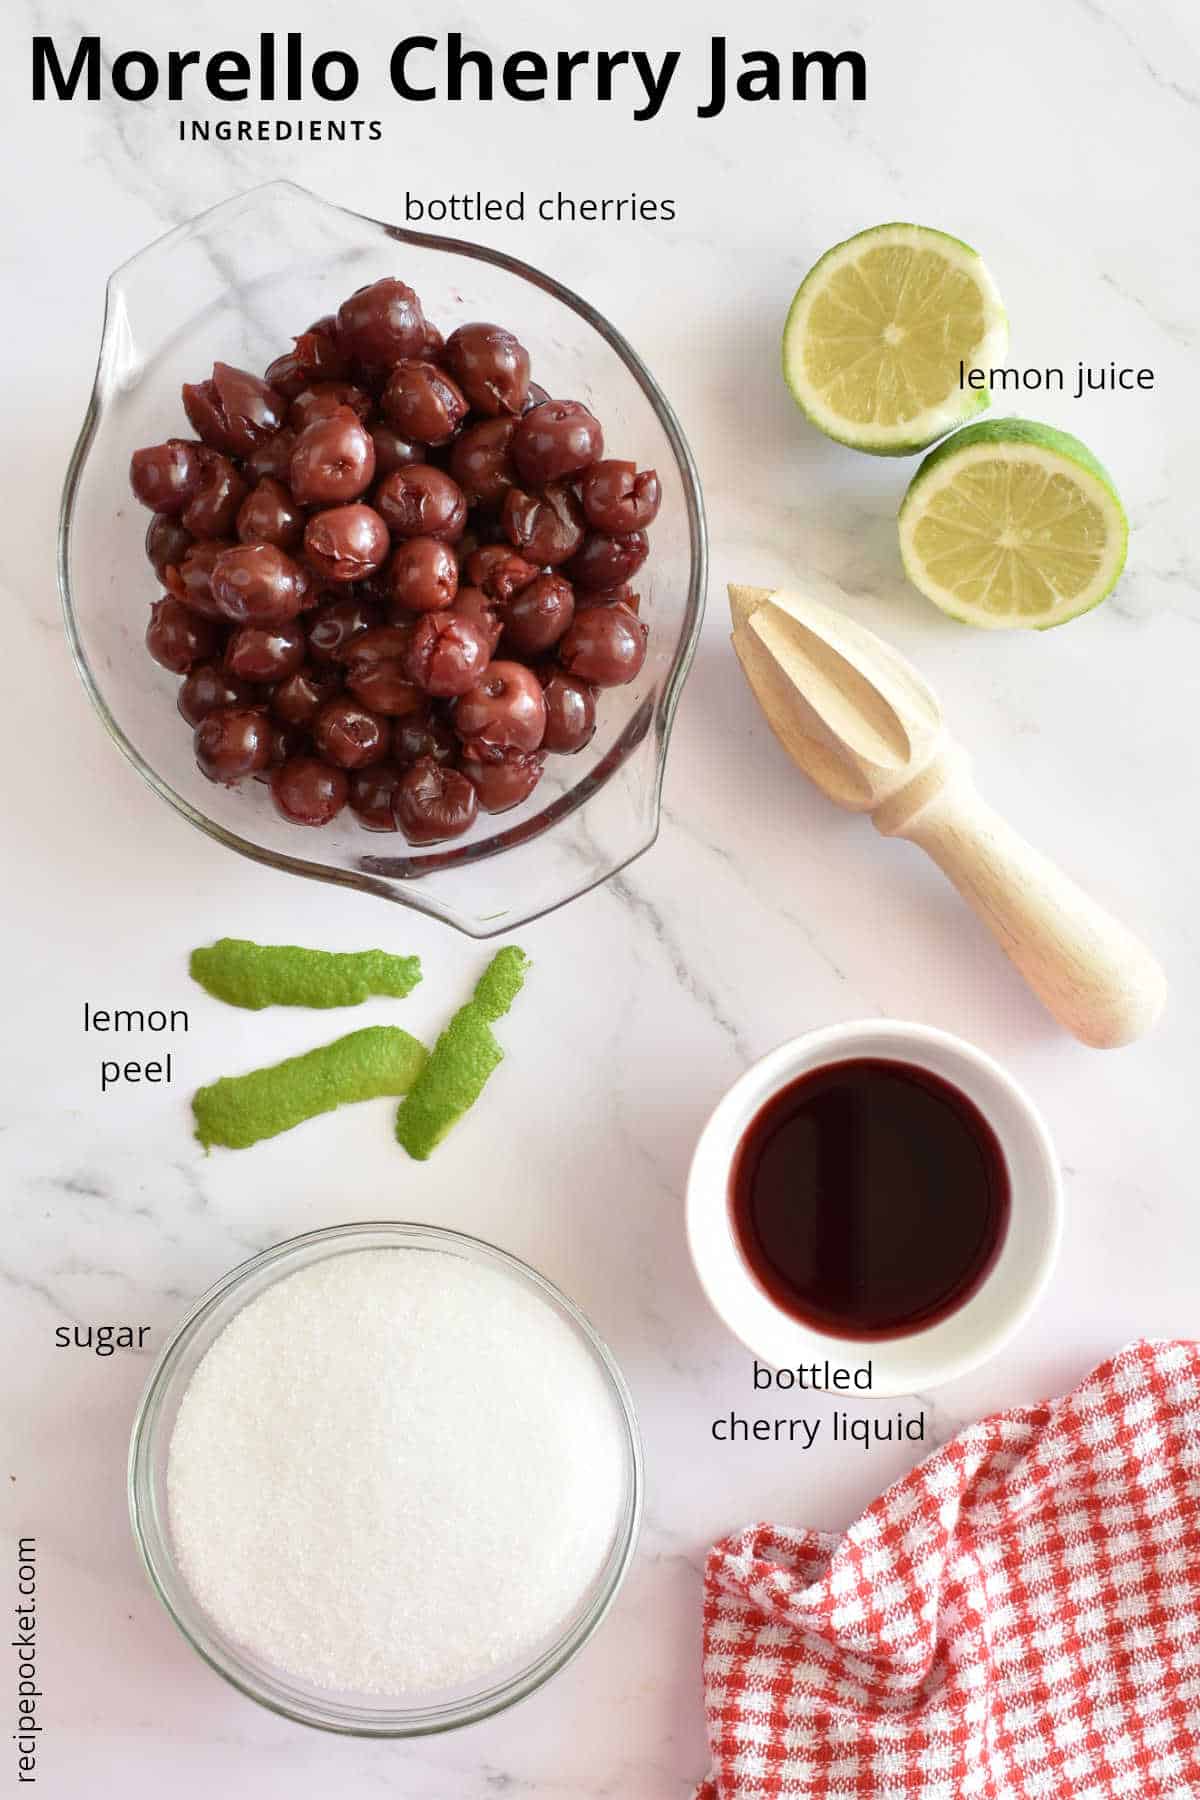 Photo showing ingredients for making cherry jam.